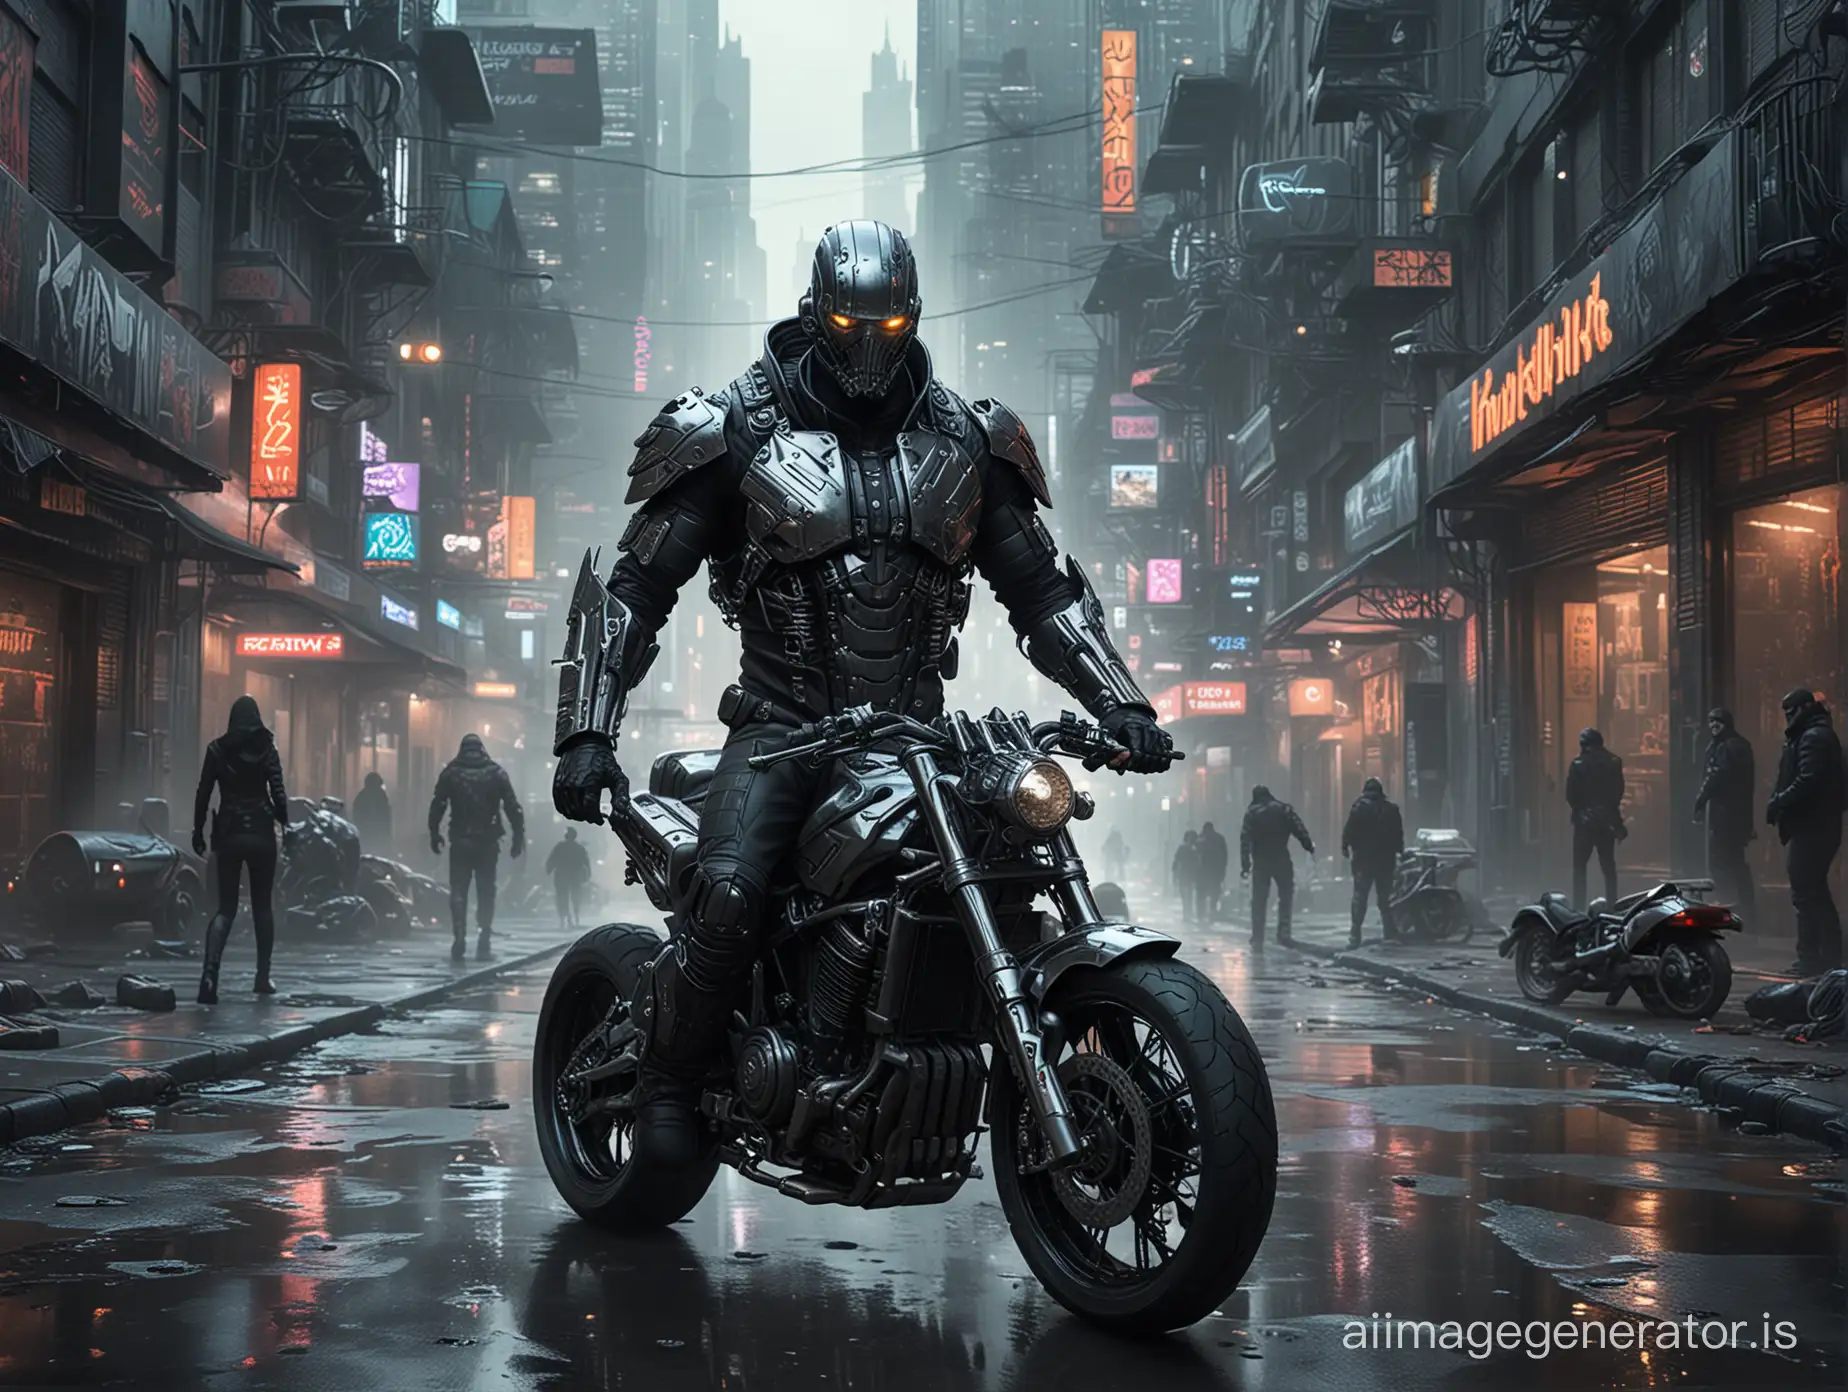 Cyberpunk-inspired scene featuring a biker with a design reminiscent of Frankenstein's or the Terminator, cloaked in chrome metallic armor with cybernetic enhancements, tattooed skin, amidst a Sin City-like atmosphere exuding an air of gothic chaos, epic composition capturing the intricacies of a chaotic world, digital painting, ultra-high detail, photorealistic, masterpiece quality, f/6